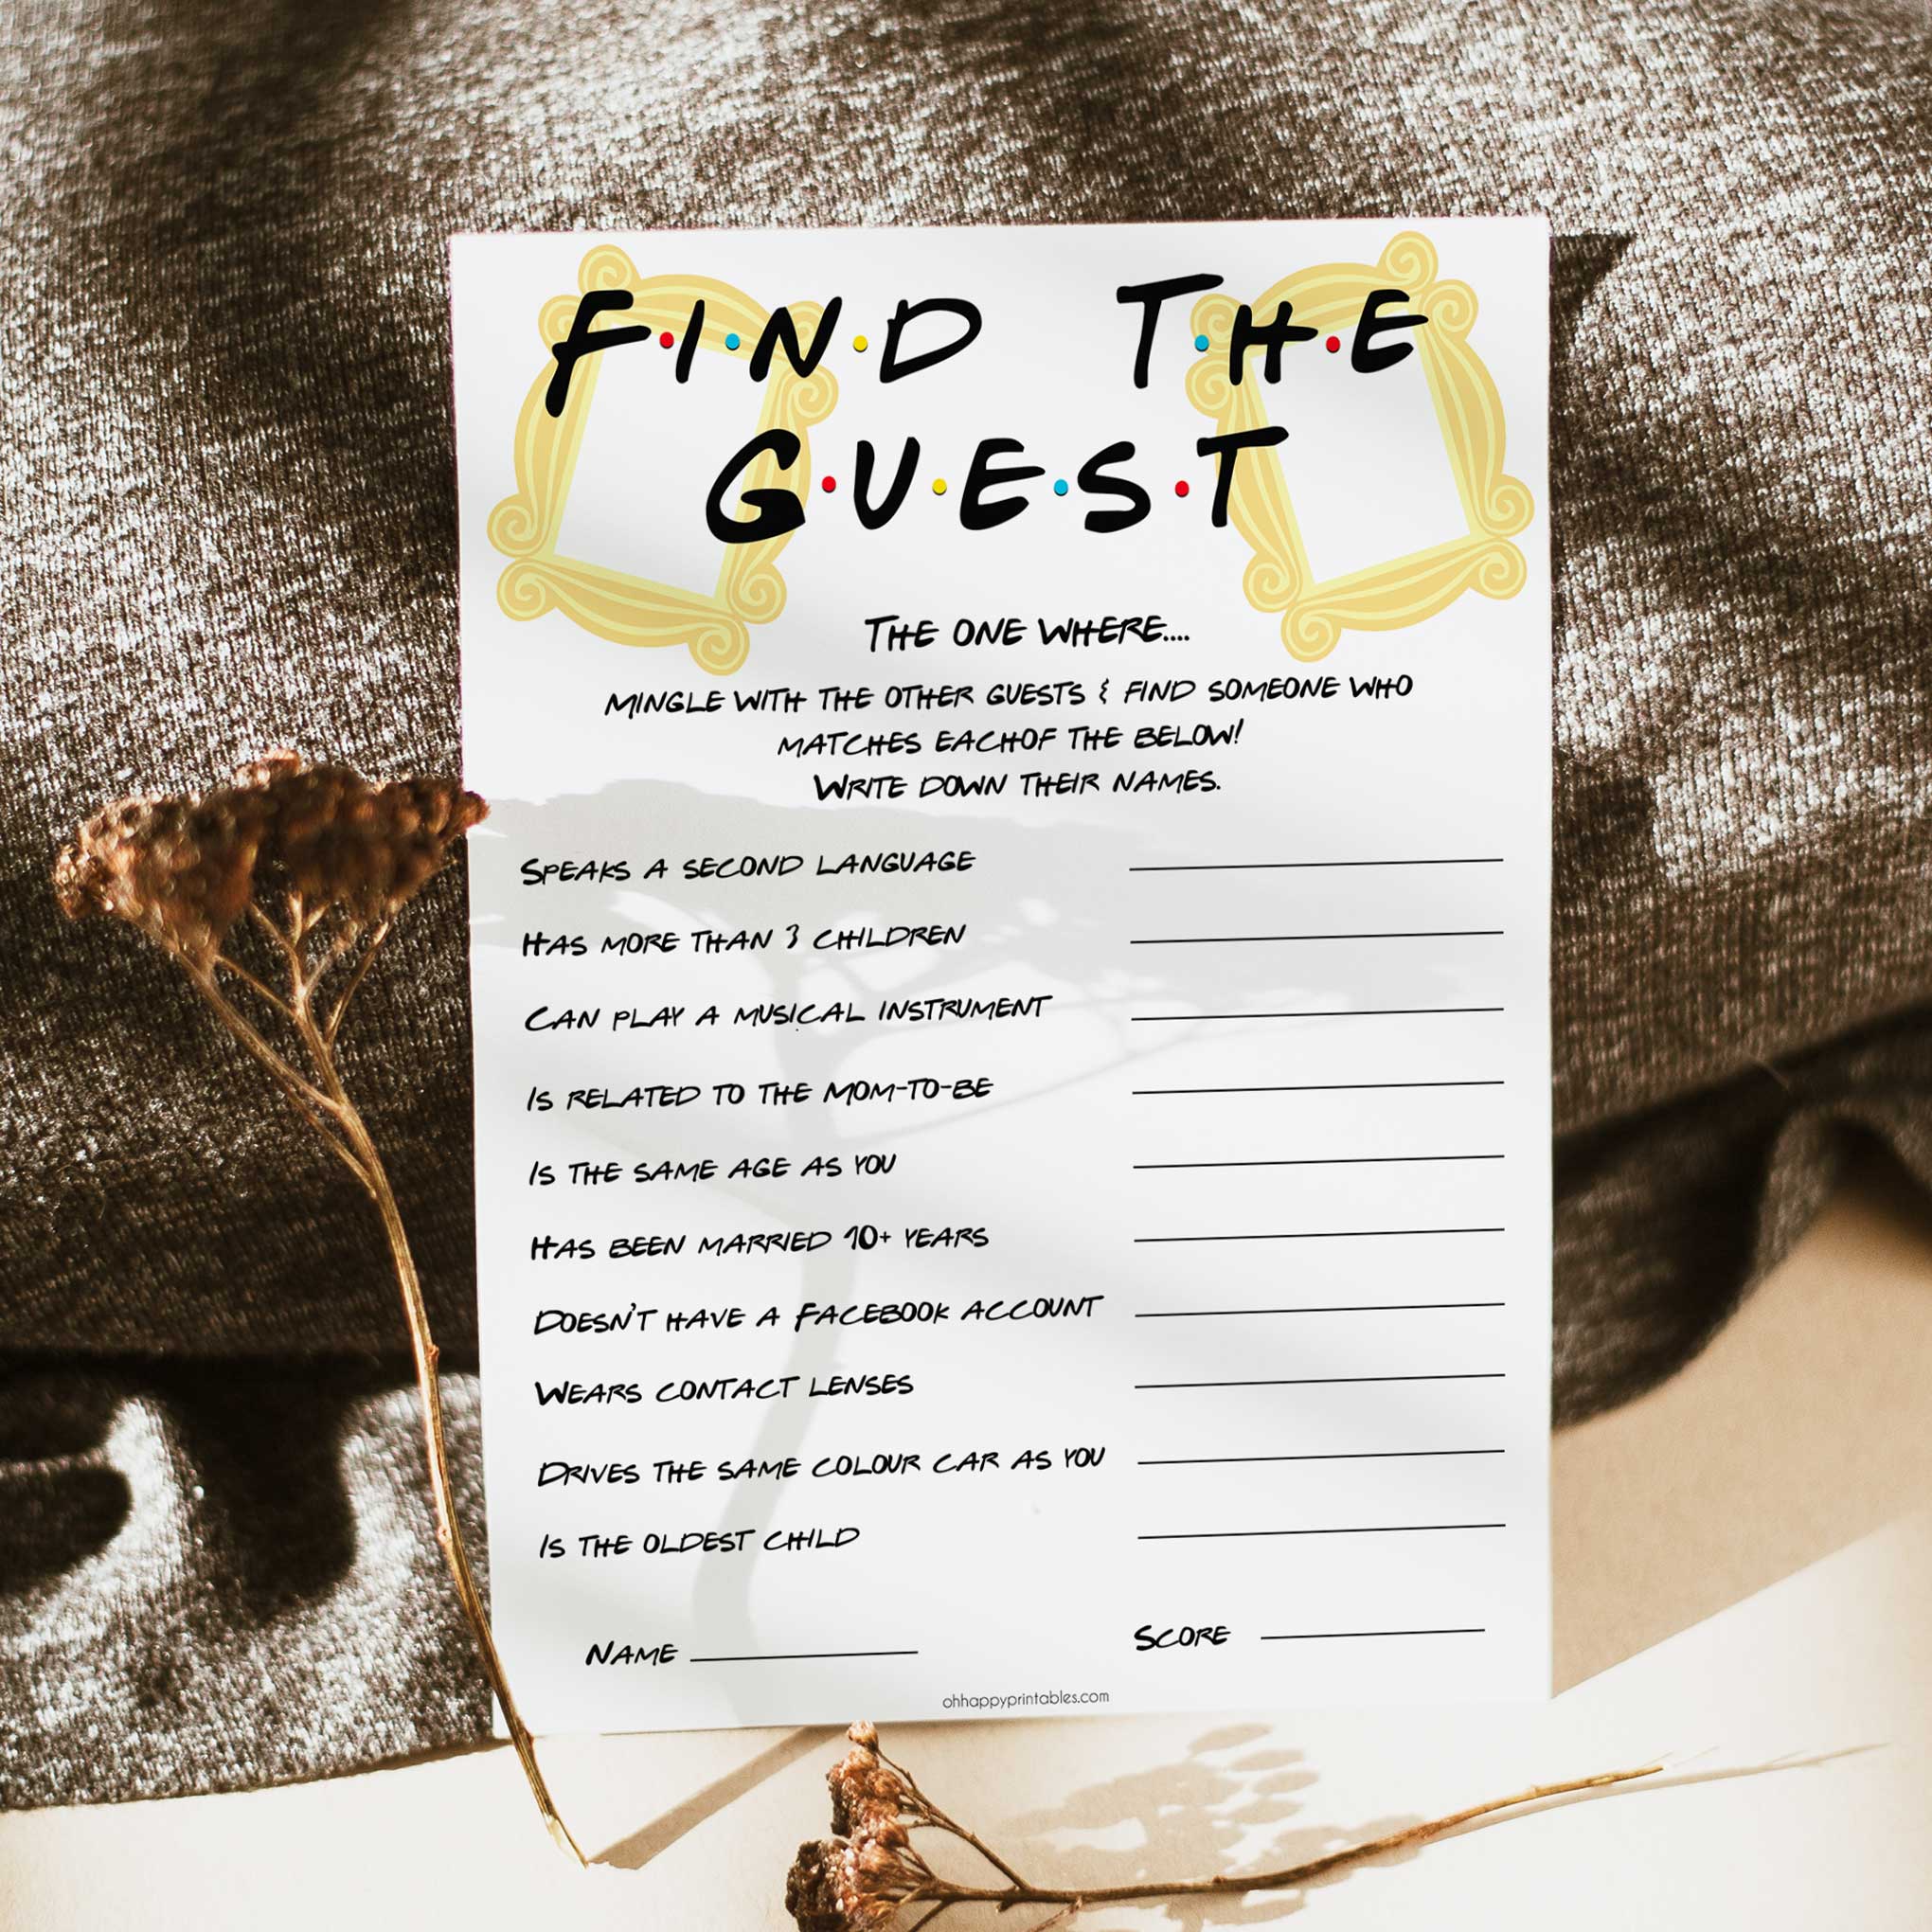 baby find the guest, Printable baby shower games, friends fun baby games, baby shower games, fun baby shower ideas, top baby shower ideas, friends baby shower, friends baby shower ideas